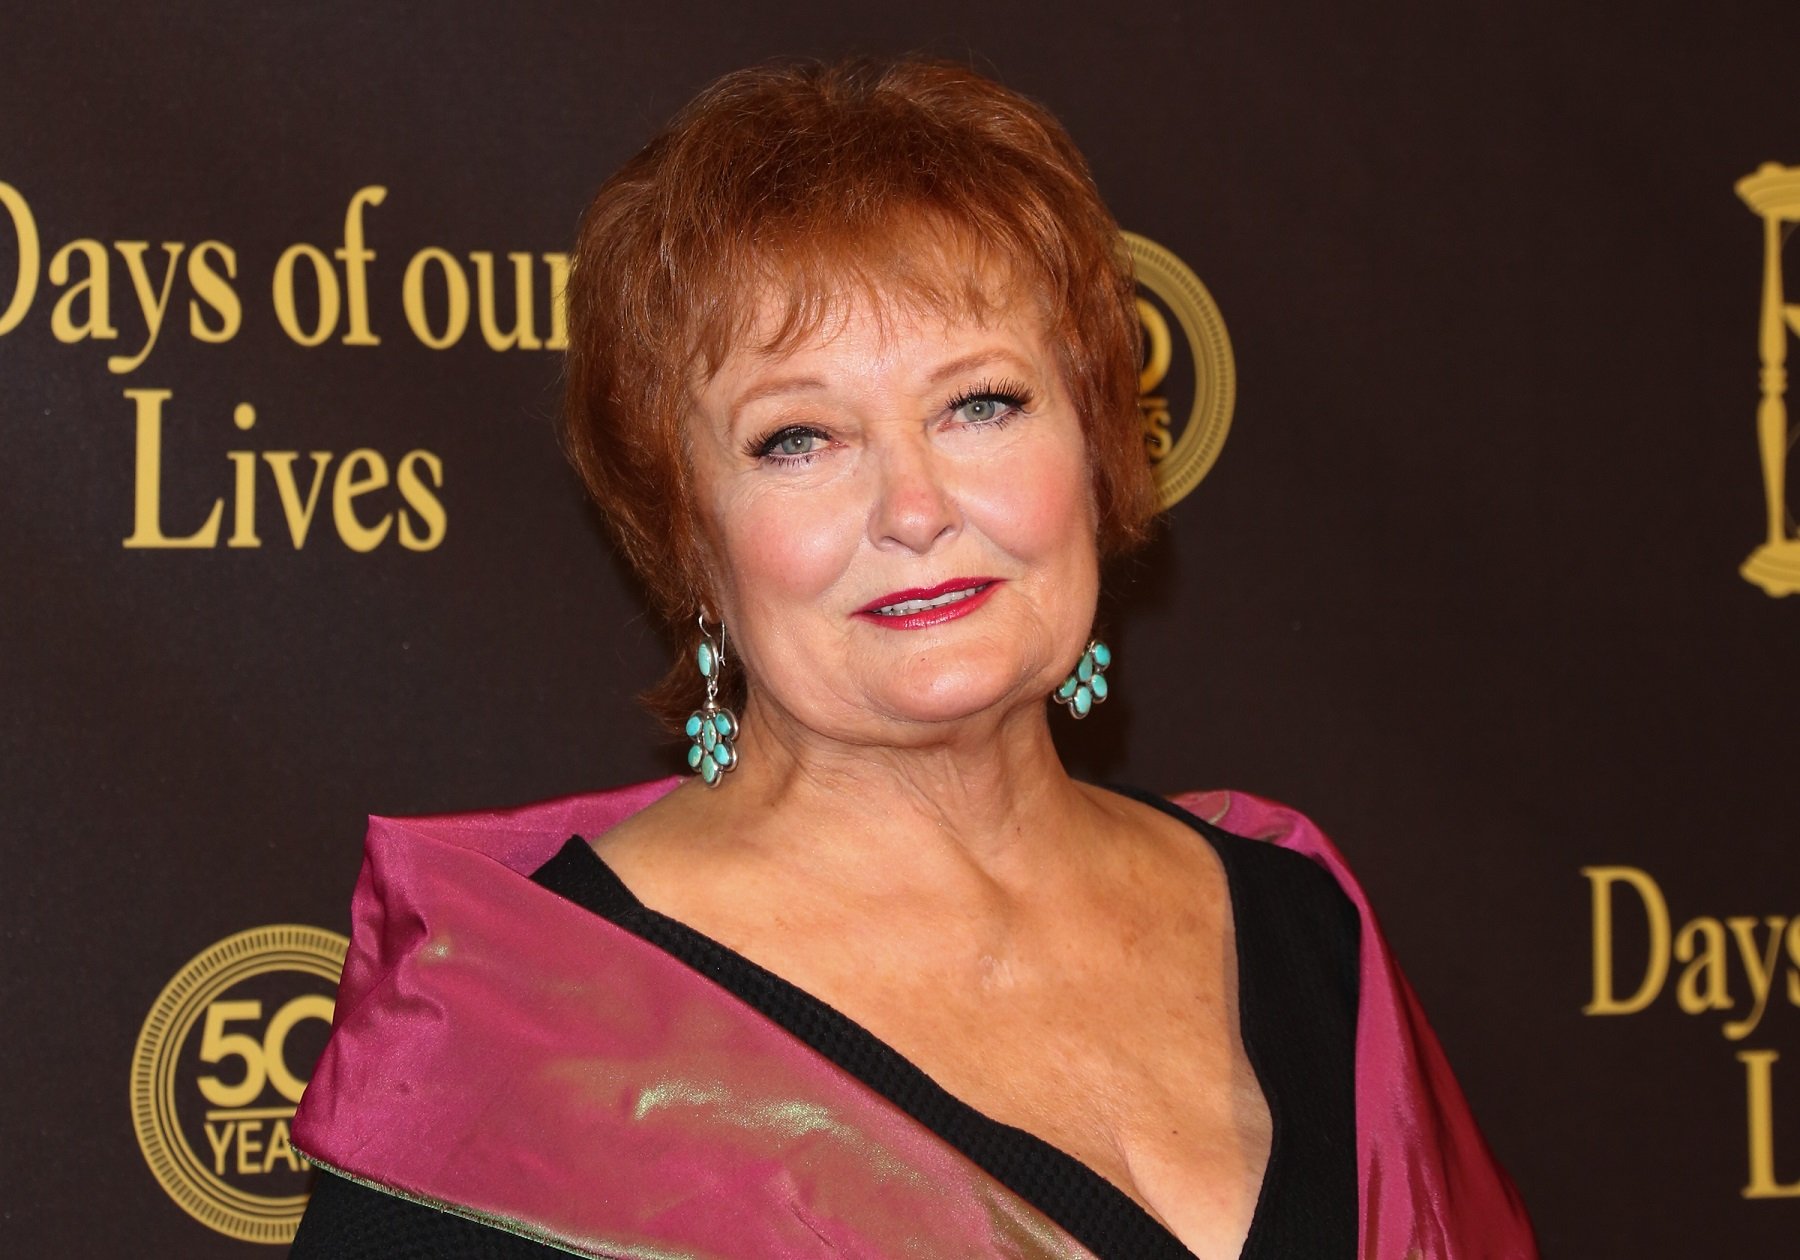 Days of Our Lives speculation focuses on Sister Marie Horton